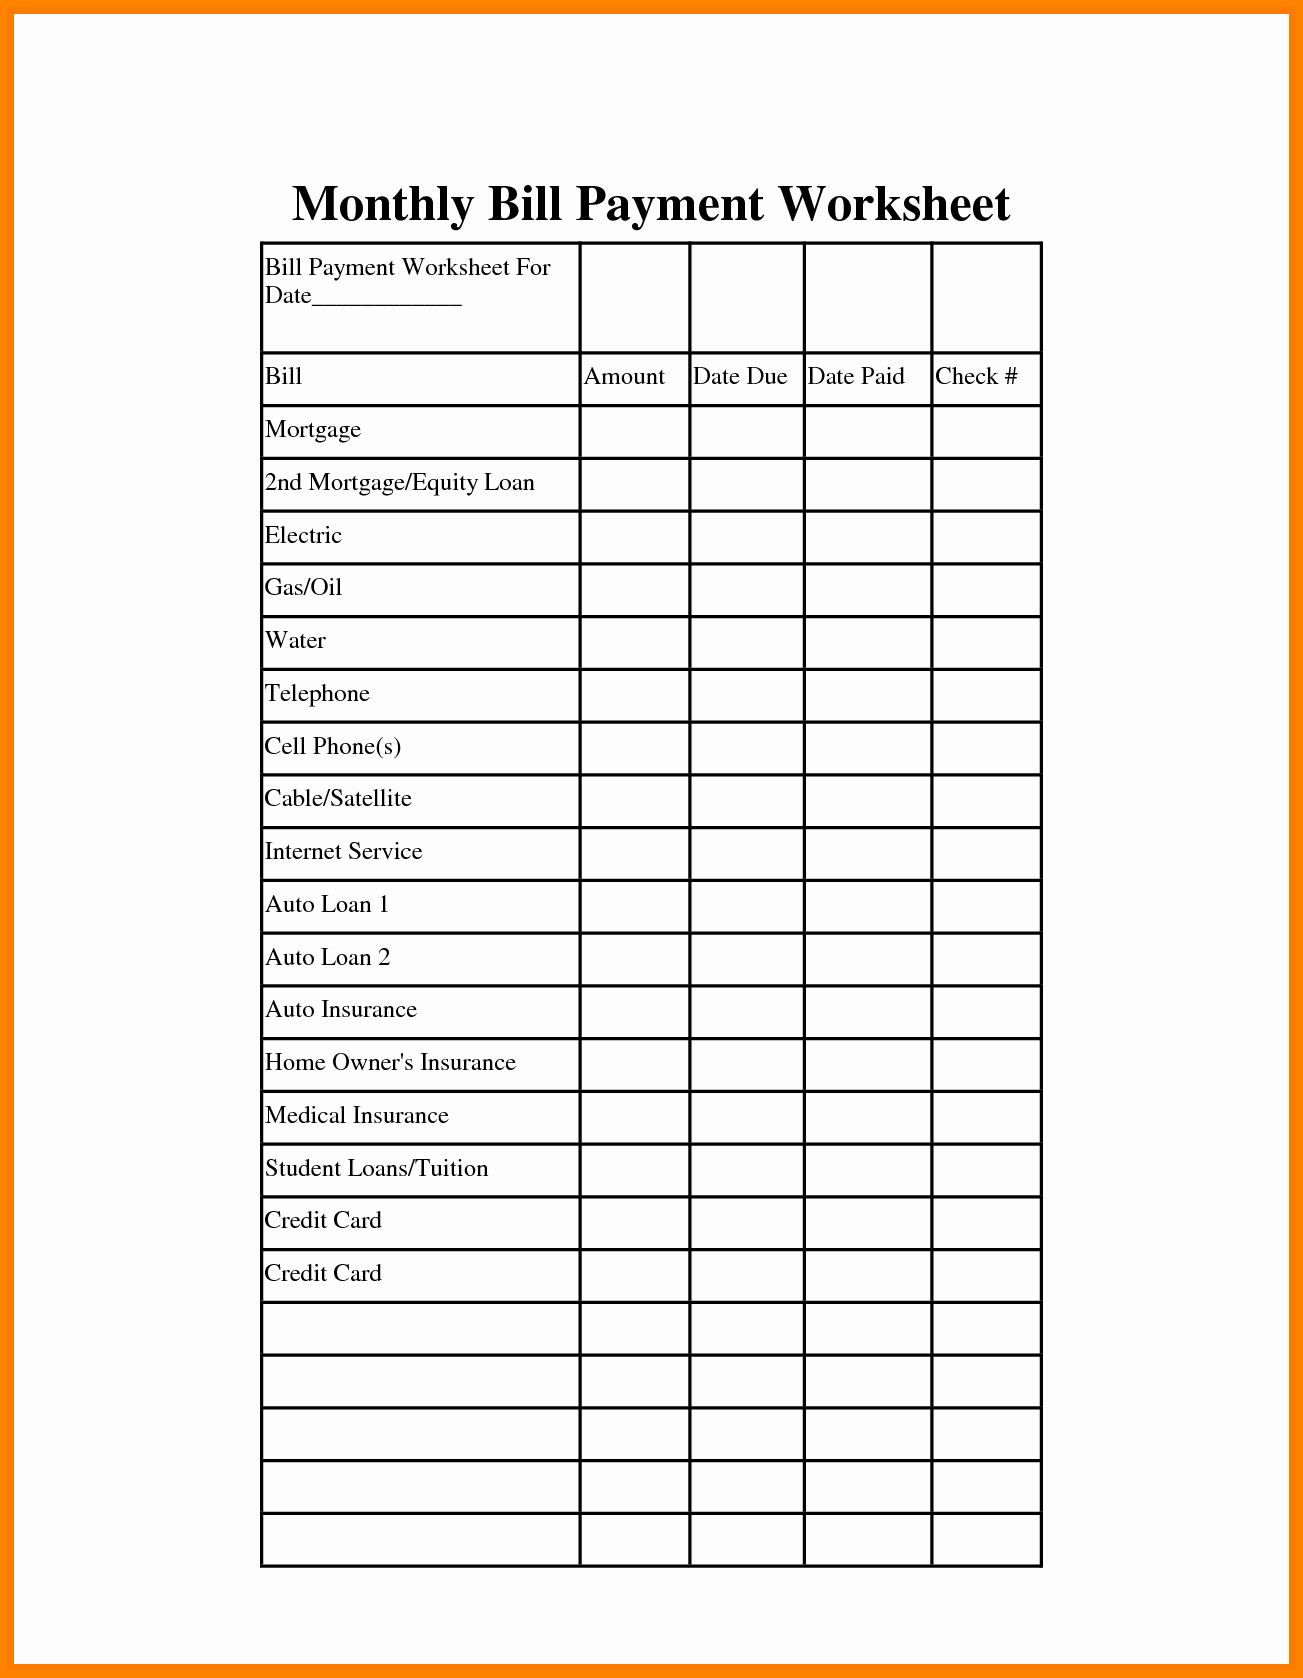 Monthly Payment Schedule Template Fresh Remarkable Monthly Bill organizer and Payment Schedule